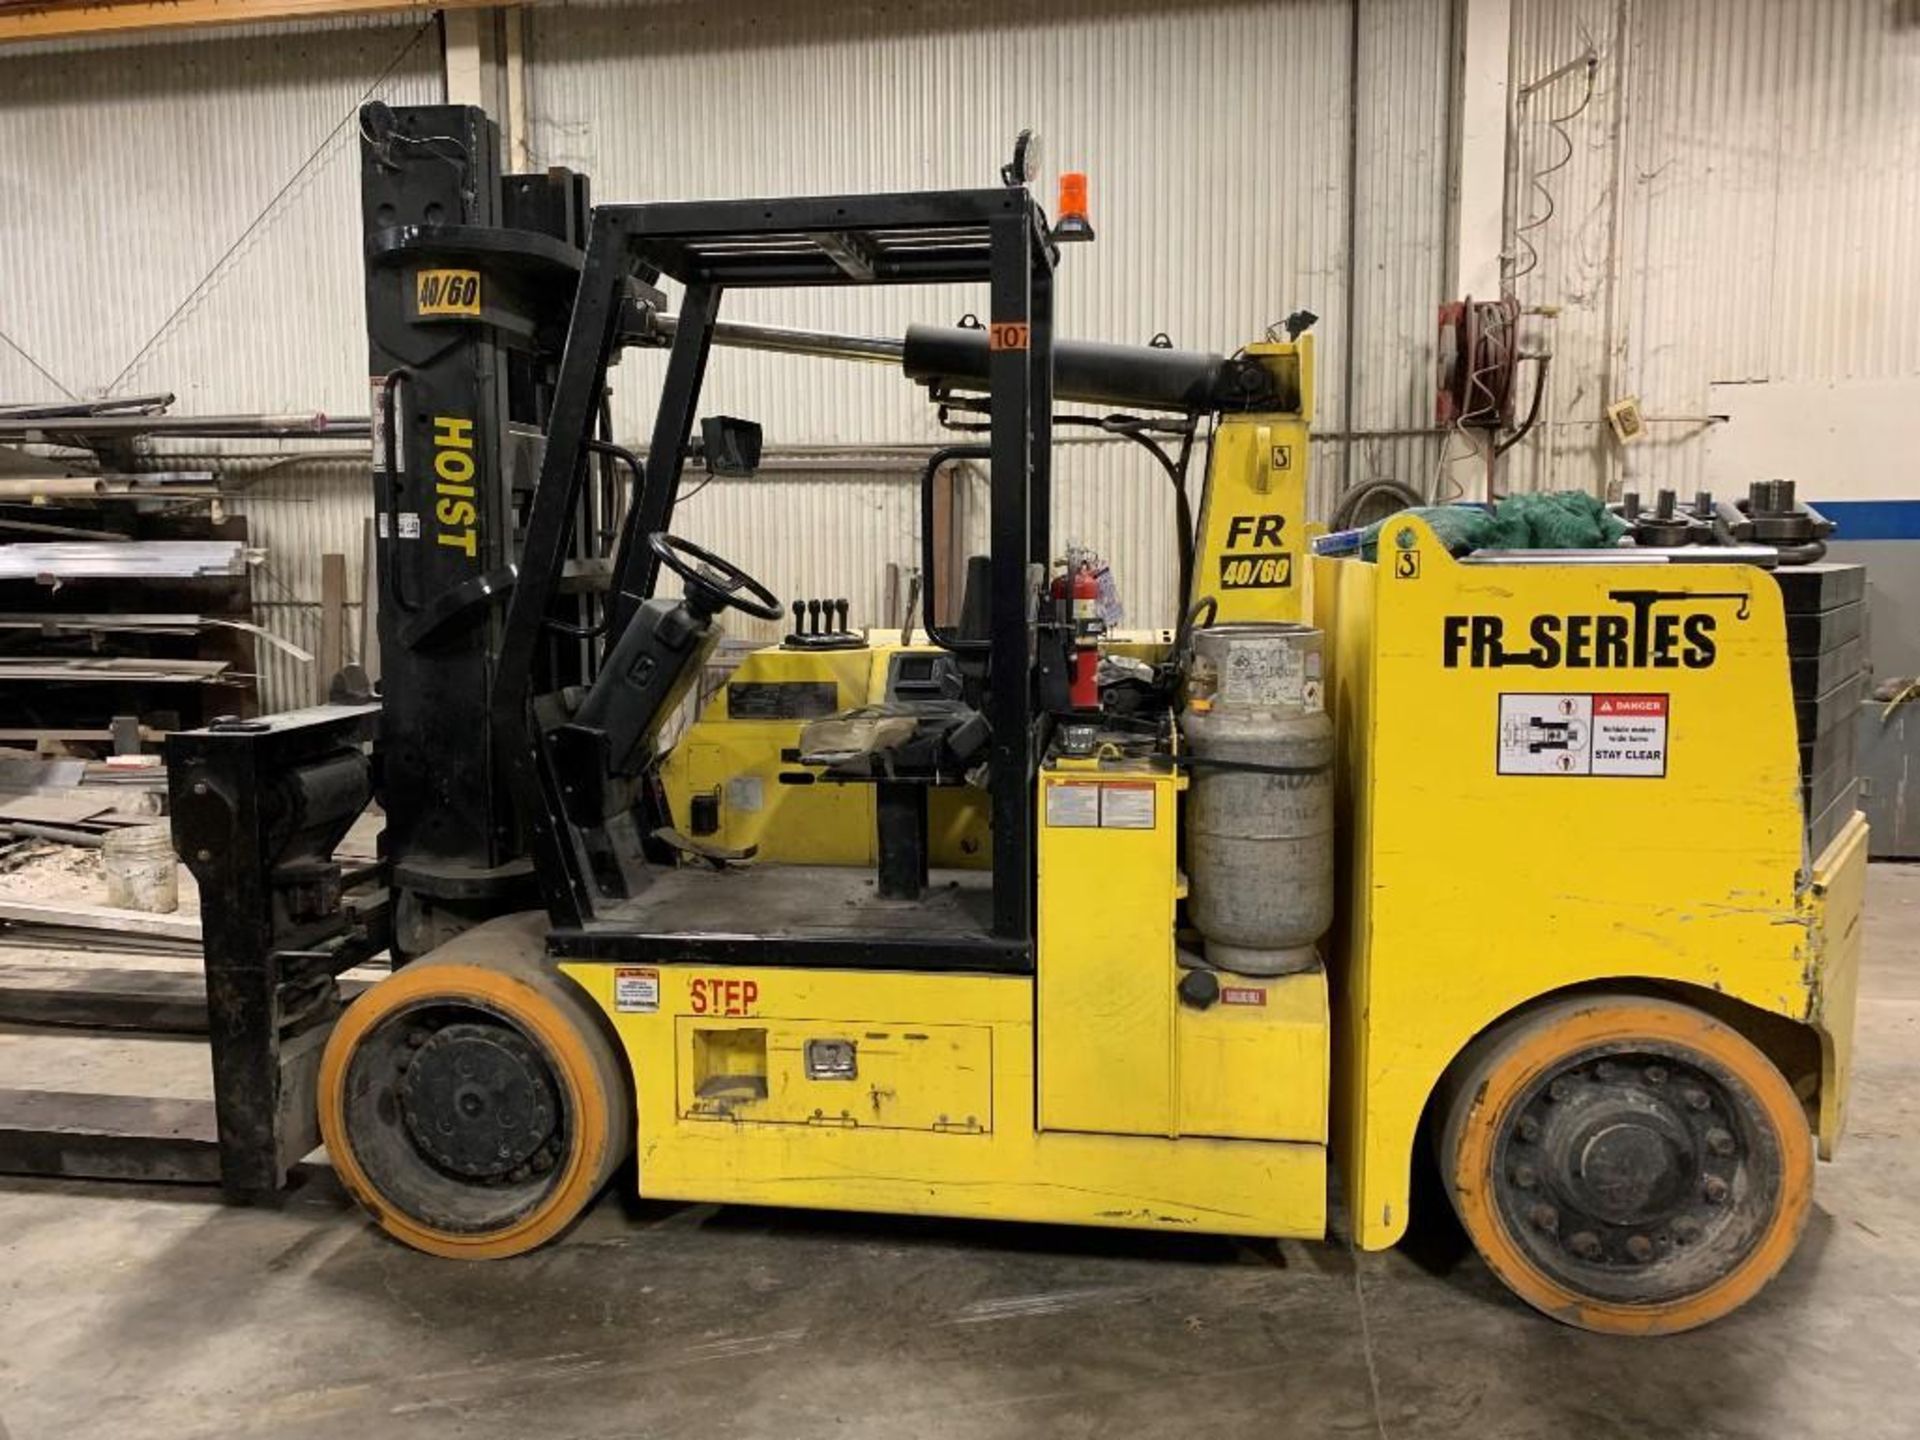 2017 HOIST FR-40/60 EXTENDABLE COUNTERWEIGHT FORKLIFT, 60,000-LB. CAPACITY @ 36'' LOAD CENTER WITH C